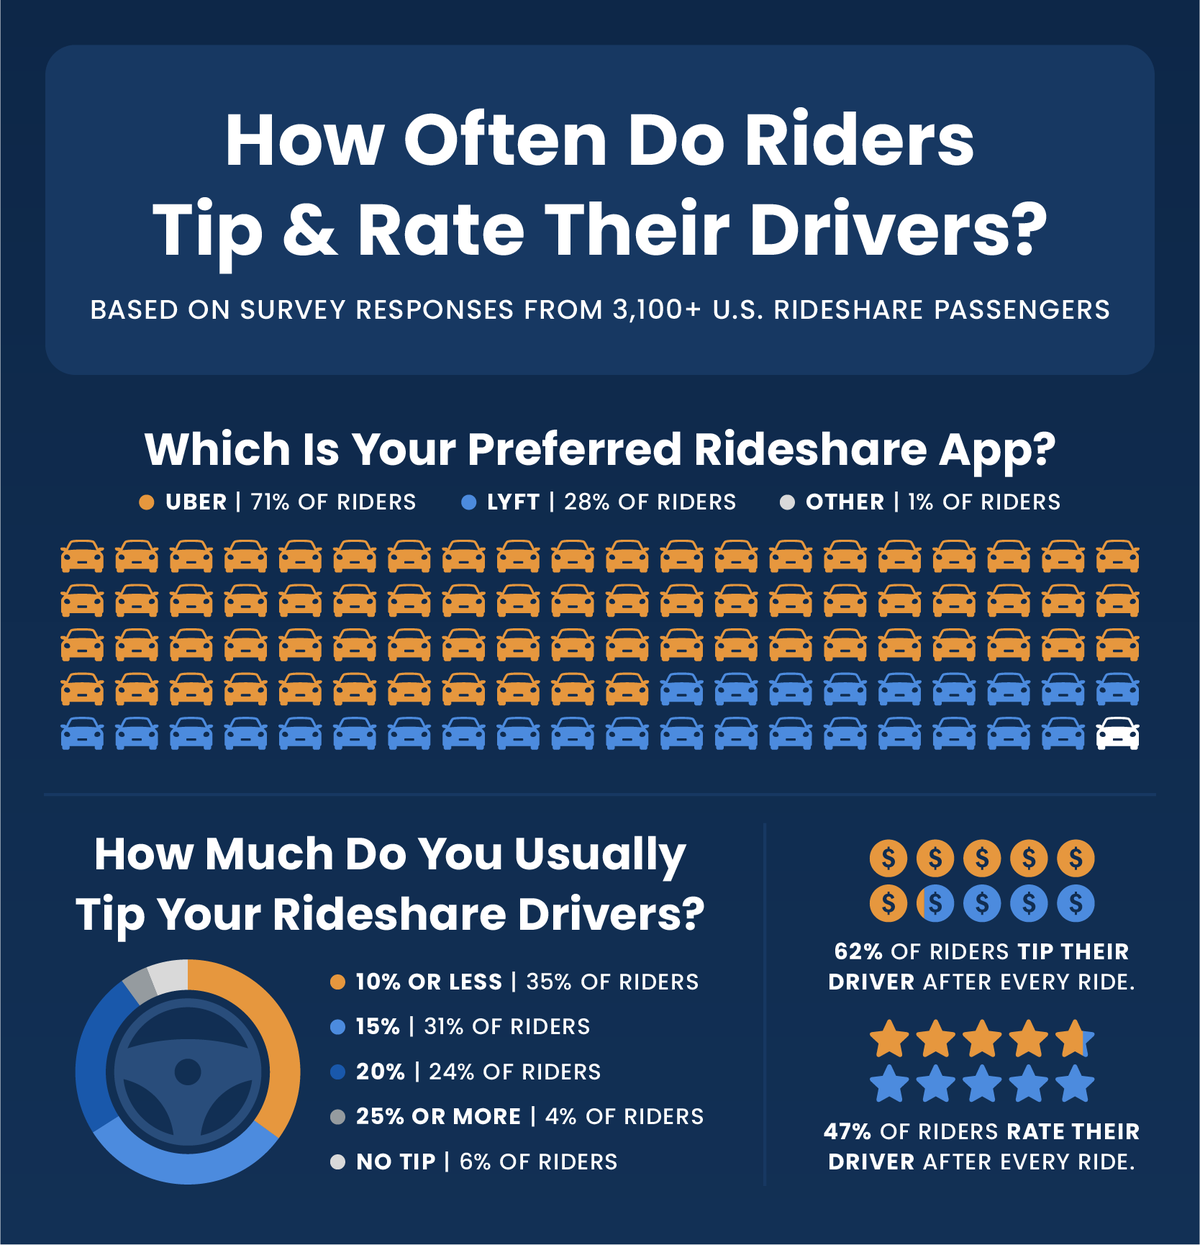 Pie chart displaying how often rideshare users tip and rate their drivers